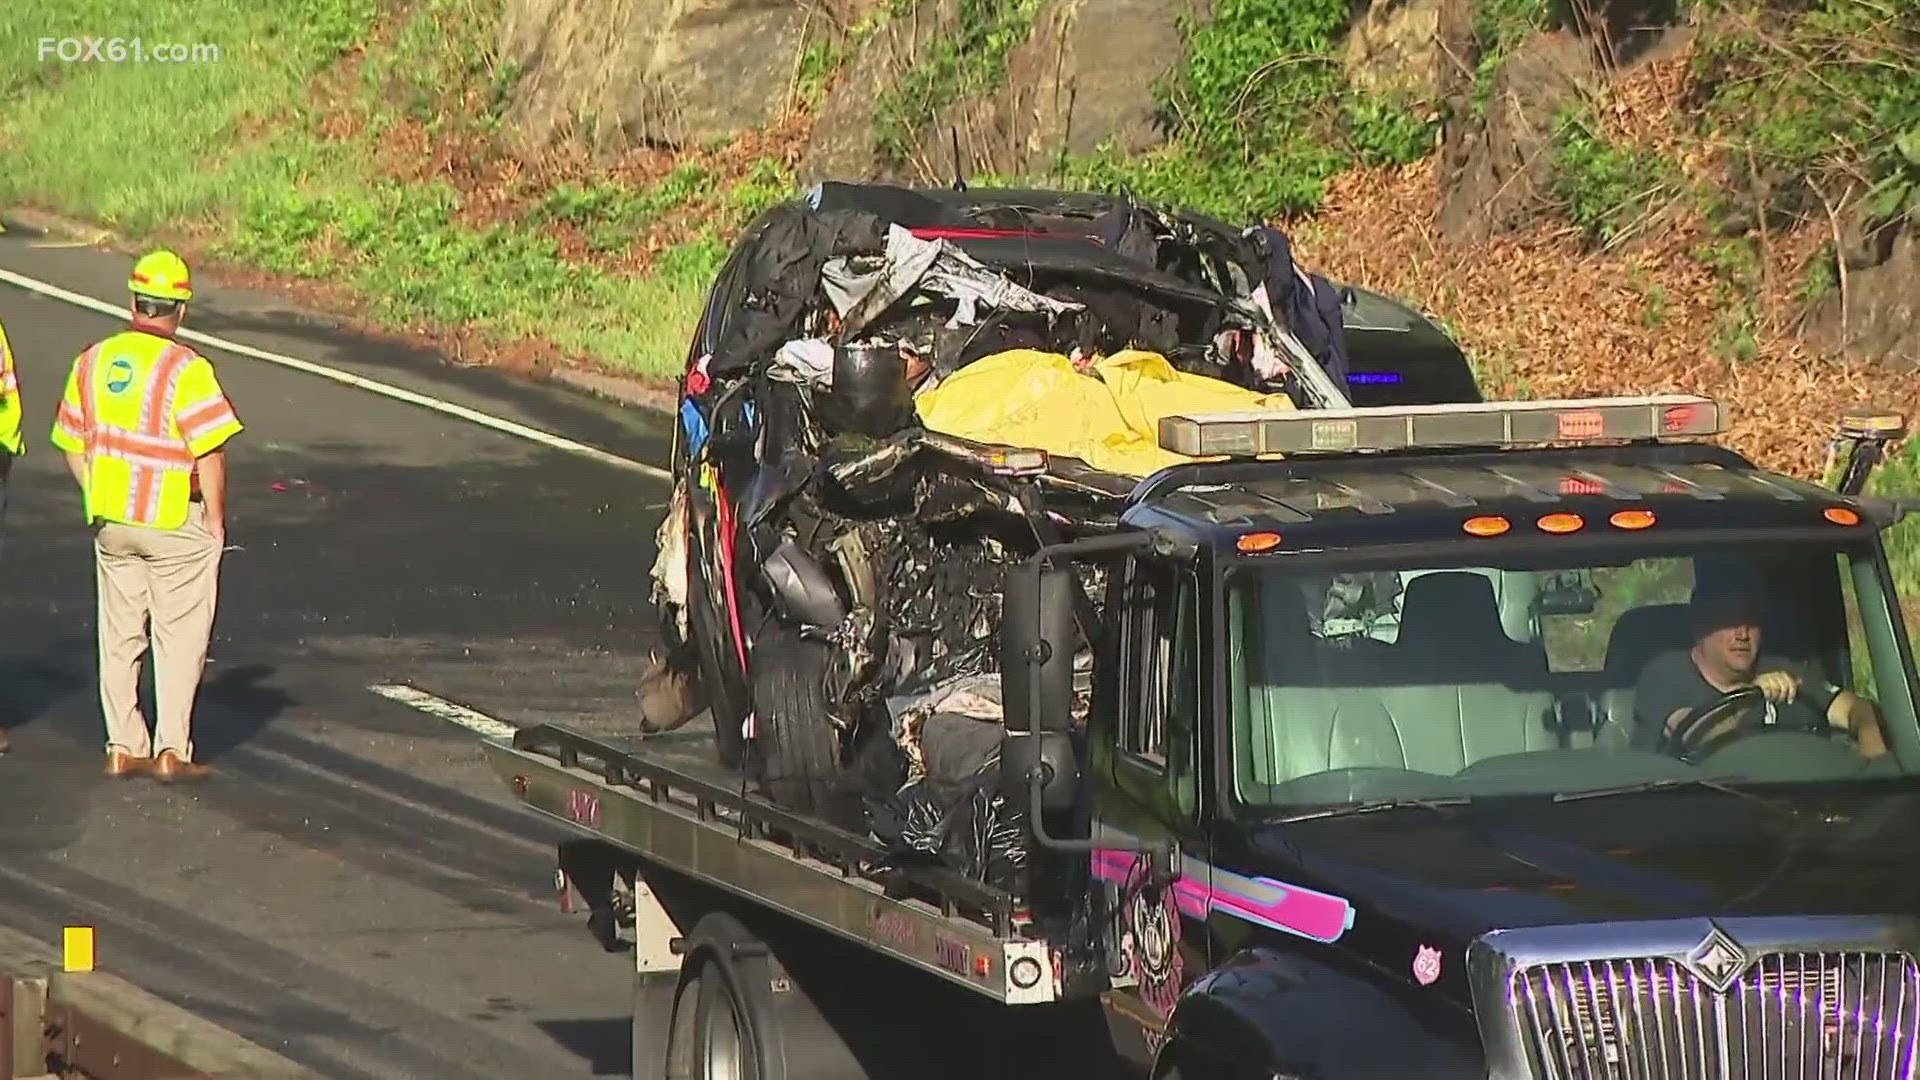 A Fairfield University student has been identified as one of the victims of a fatal wrong-way crash on Route 15 in Stratford that happened Thursday morning.